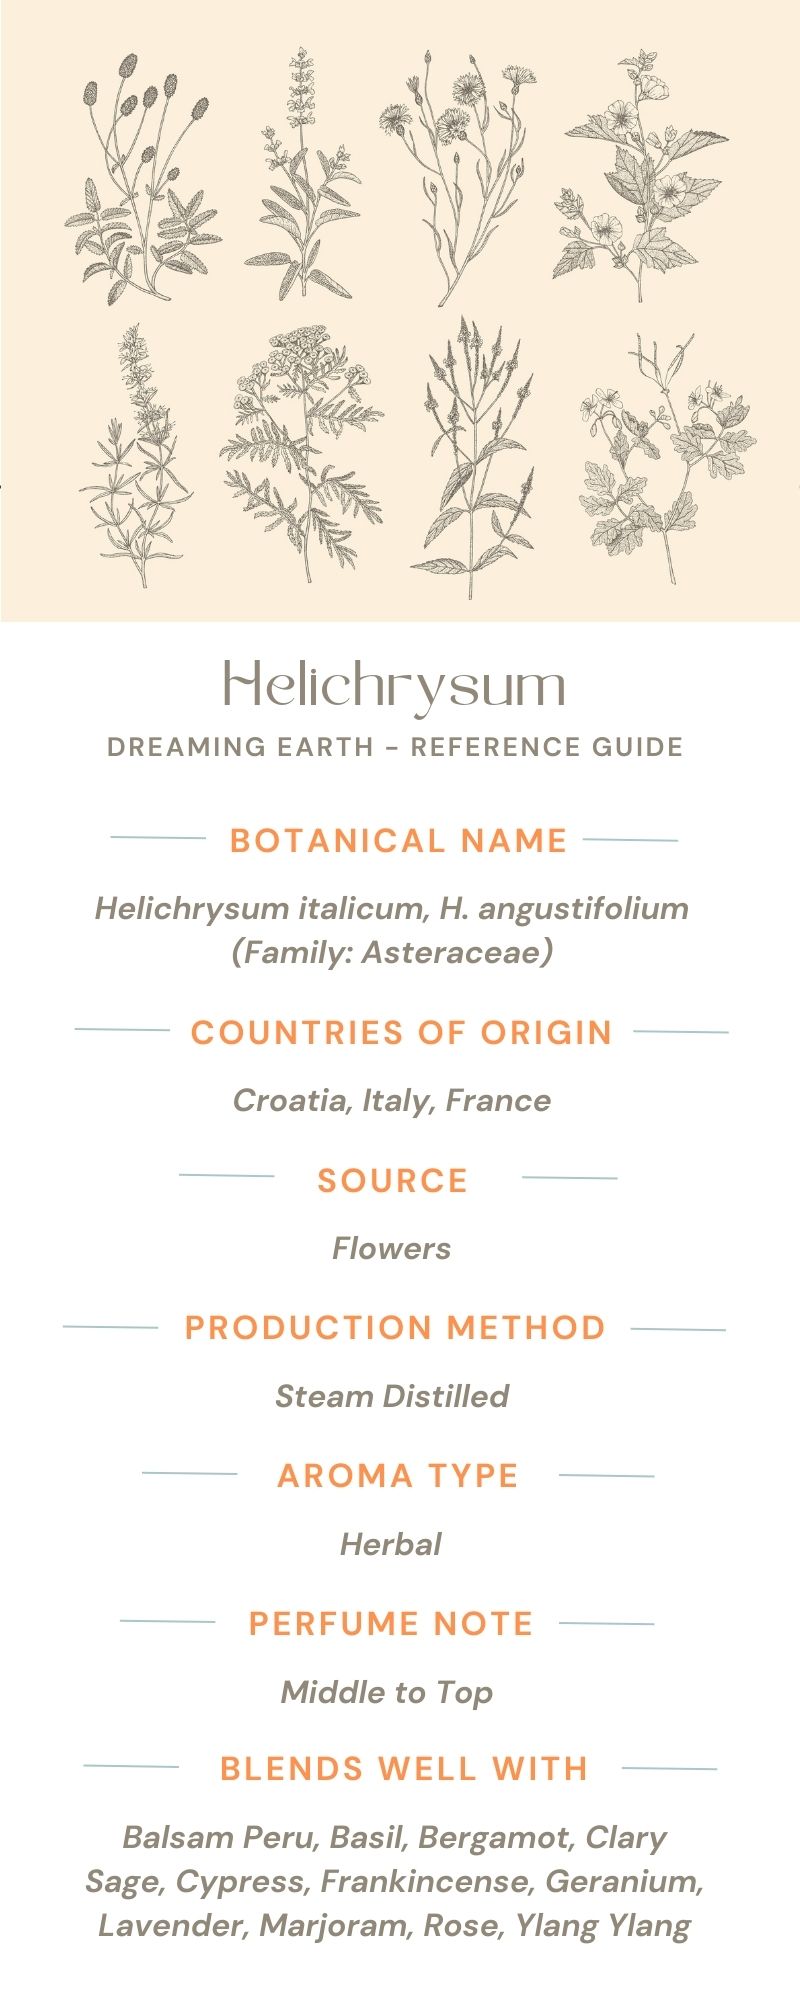 Load image into Gallery viewer, Helichrysum 5% Essential Oil - Dreaming Earth Inc
